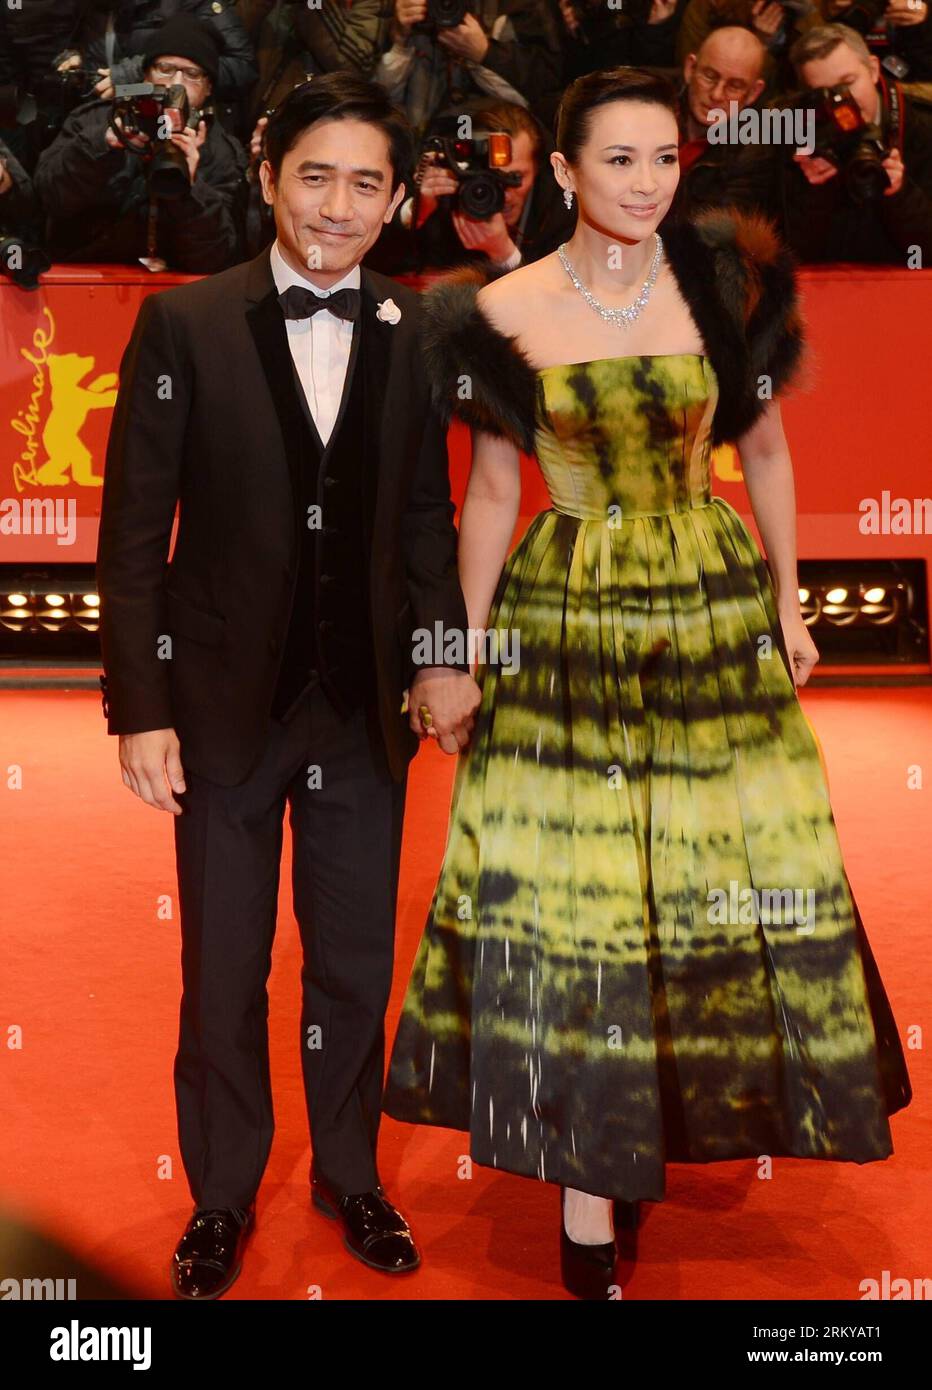 Bildnummer: 59188754  Datum: 07.02.2013  Copyright: imago/Xinhua Chinese actor Tony Leung (L) and Chinese actress Zhang Ziyi arrive on the red carpet for the opening ceremony of the 63rd Berlin film festival in Berlin, Germany, on Feb. 7, 2013. The 63rd Berlin film festival opened Thursday with a martial arts epic The grandmaster of Chinese director Wong Kar Wai who will also lead the jury of this Berlinale. (Xinhua/Ma Ning) GERMANY-BERLIN-ENTERTAINMENT-FILM-FESTIVAL PUBLICATIONxNOTxINxCHN Kultur Entertainment People Film Festival Filmfestival 63 Internationale Berlinale x0x xdd premiumd 2013 Stock Photo